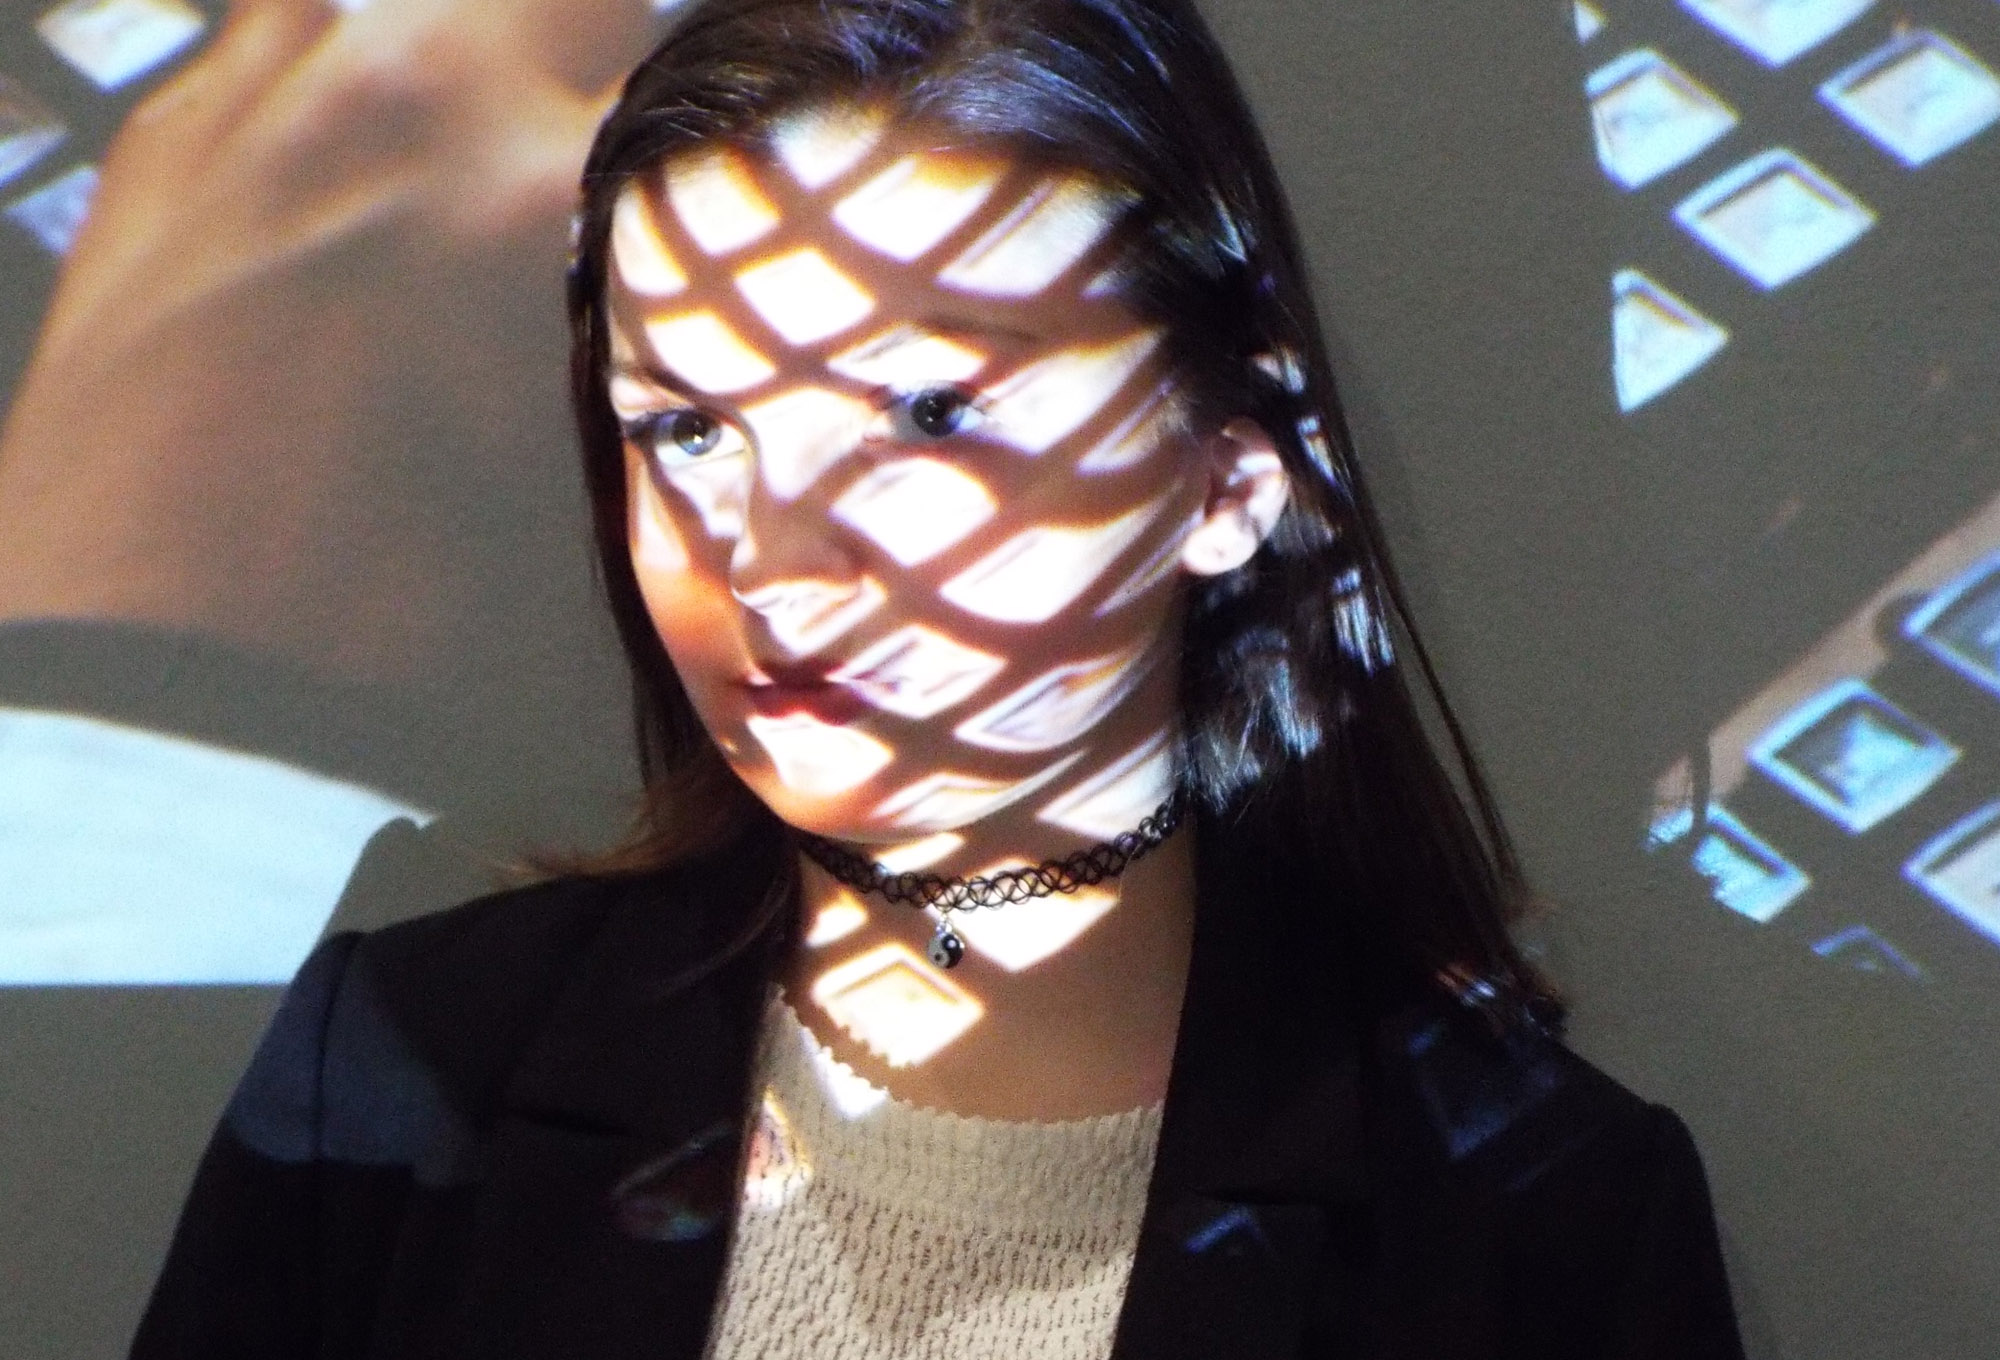 a portrait of a person in front of a projector, projecting a grid pattern onto their face